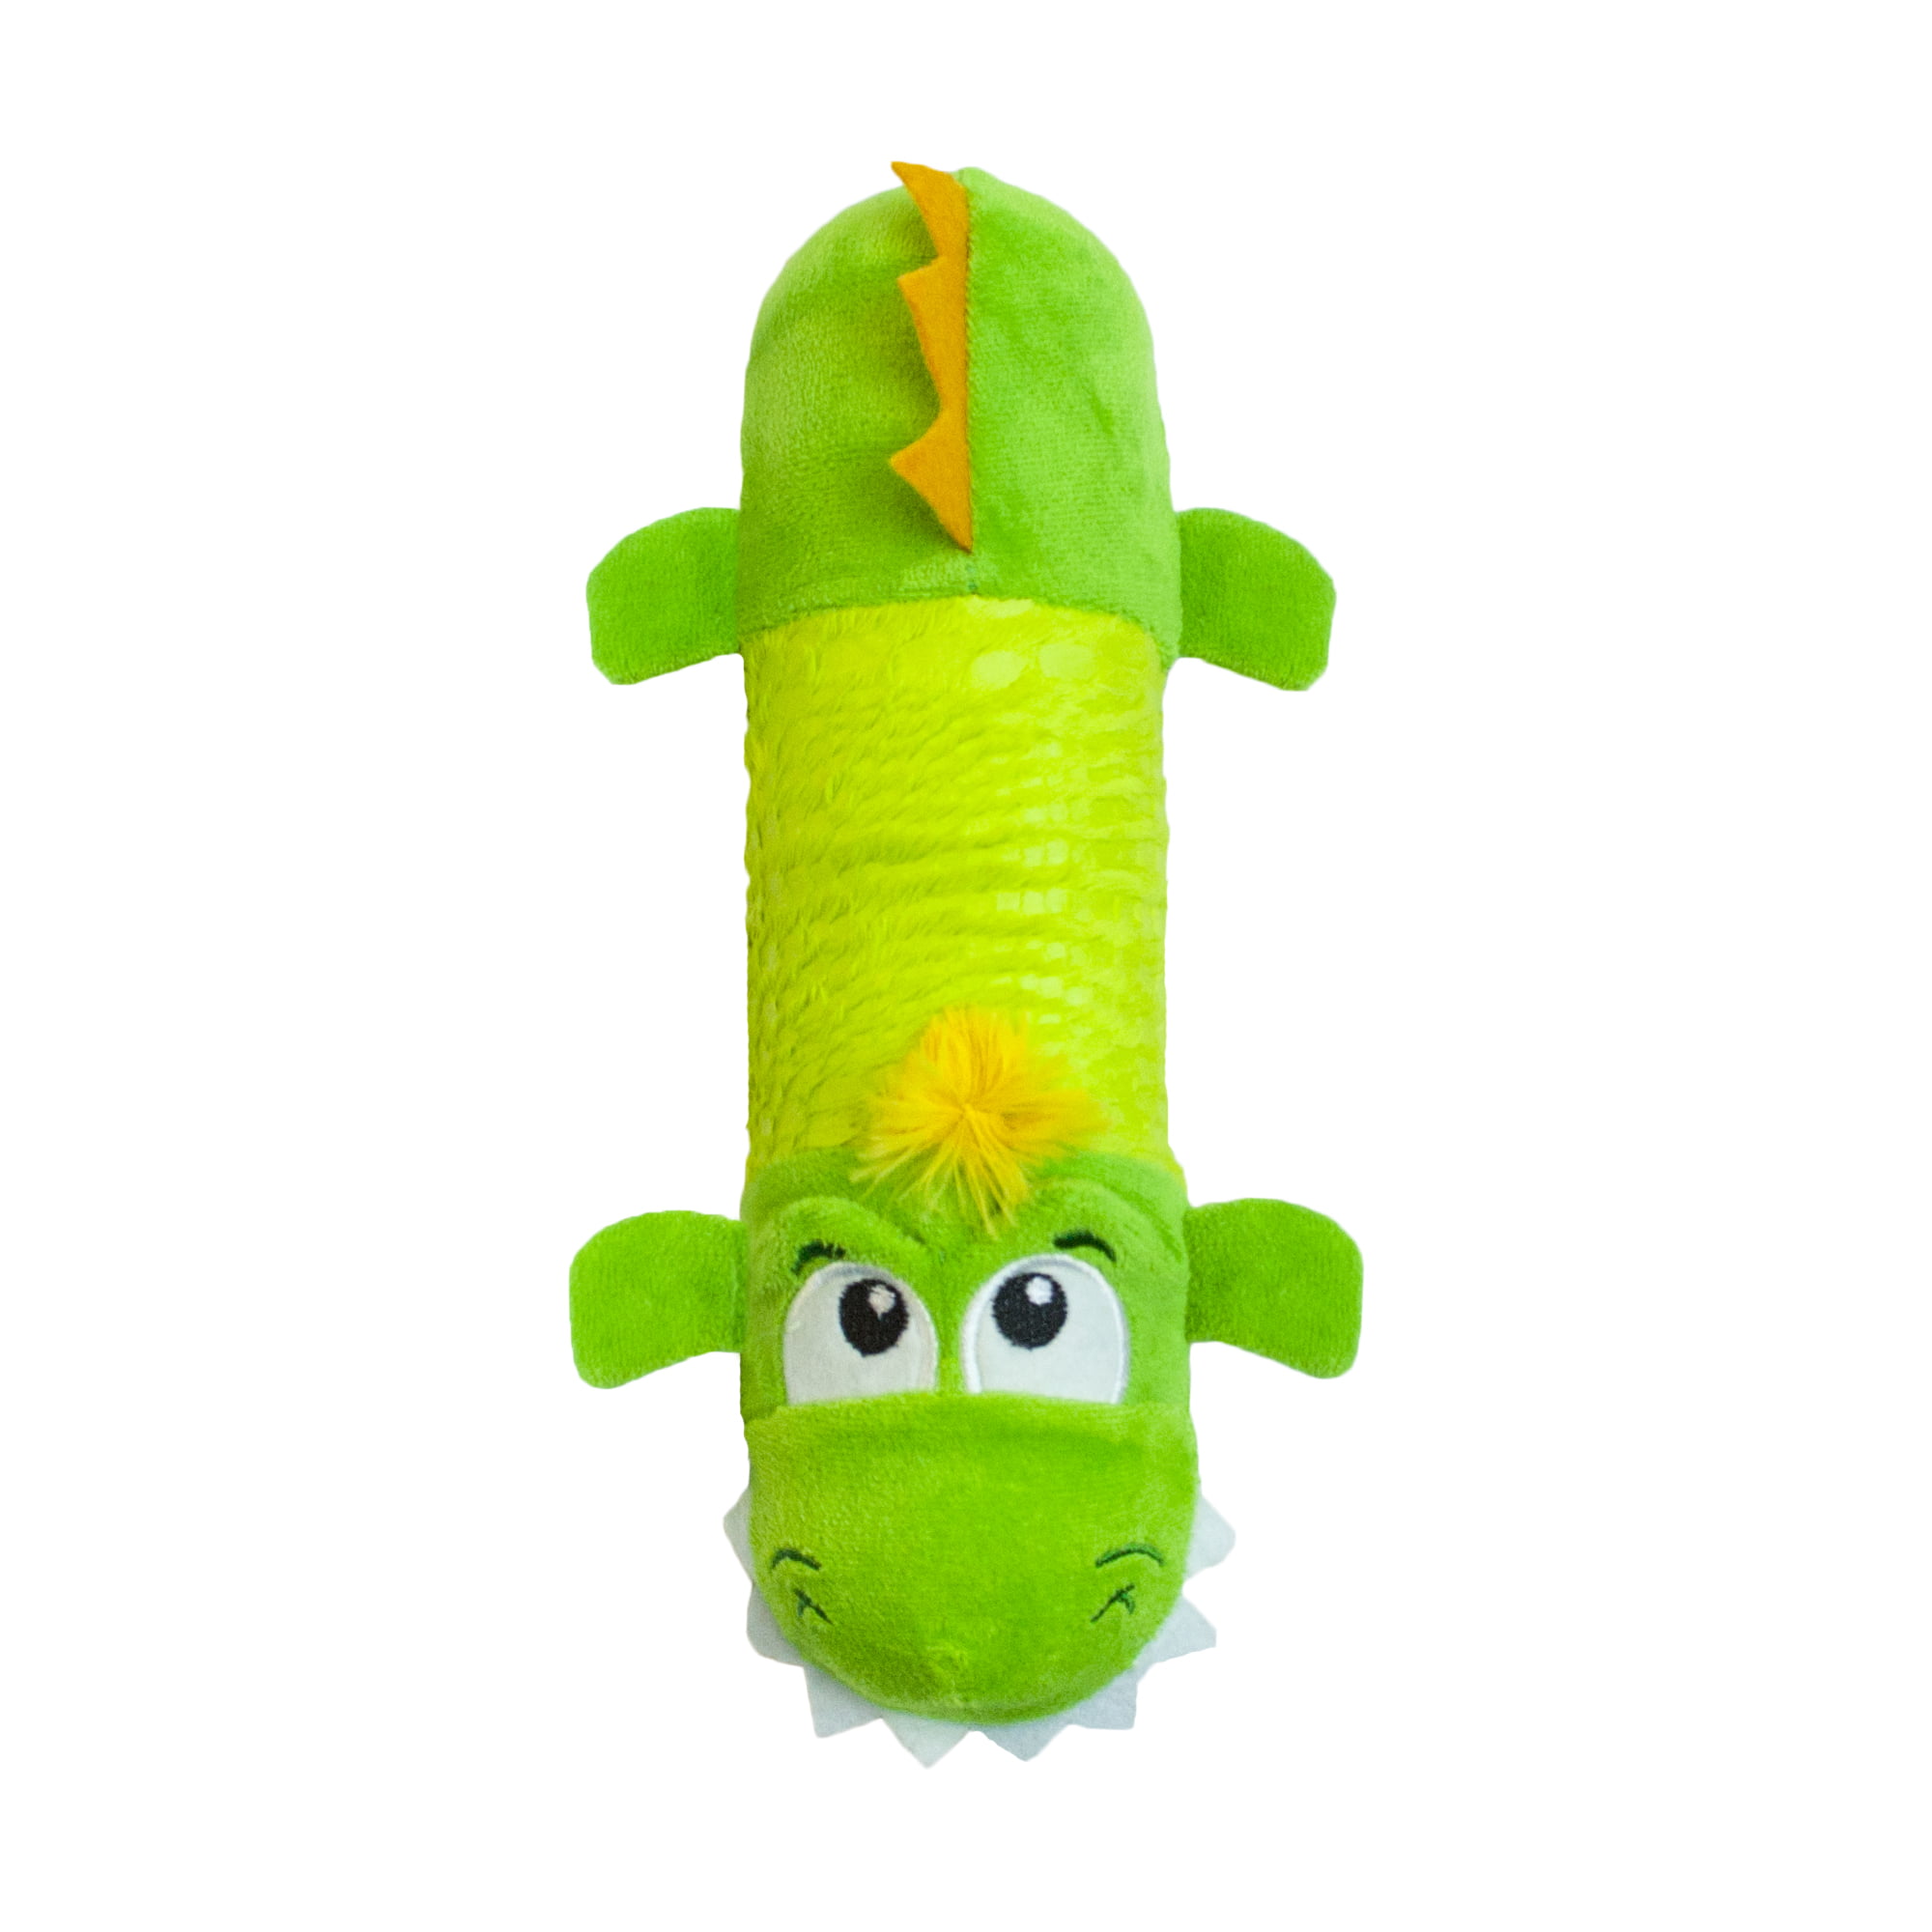 Outward Hound Squeaker Matz Squeaky Dog Toy Tough & Durable Plush Fluffy Toy for Awesome Pets Interactive Cuddly Gator Soft Toy for Dogs